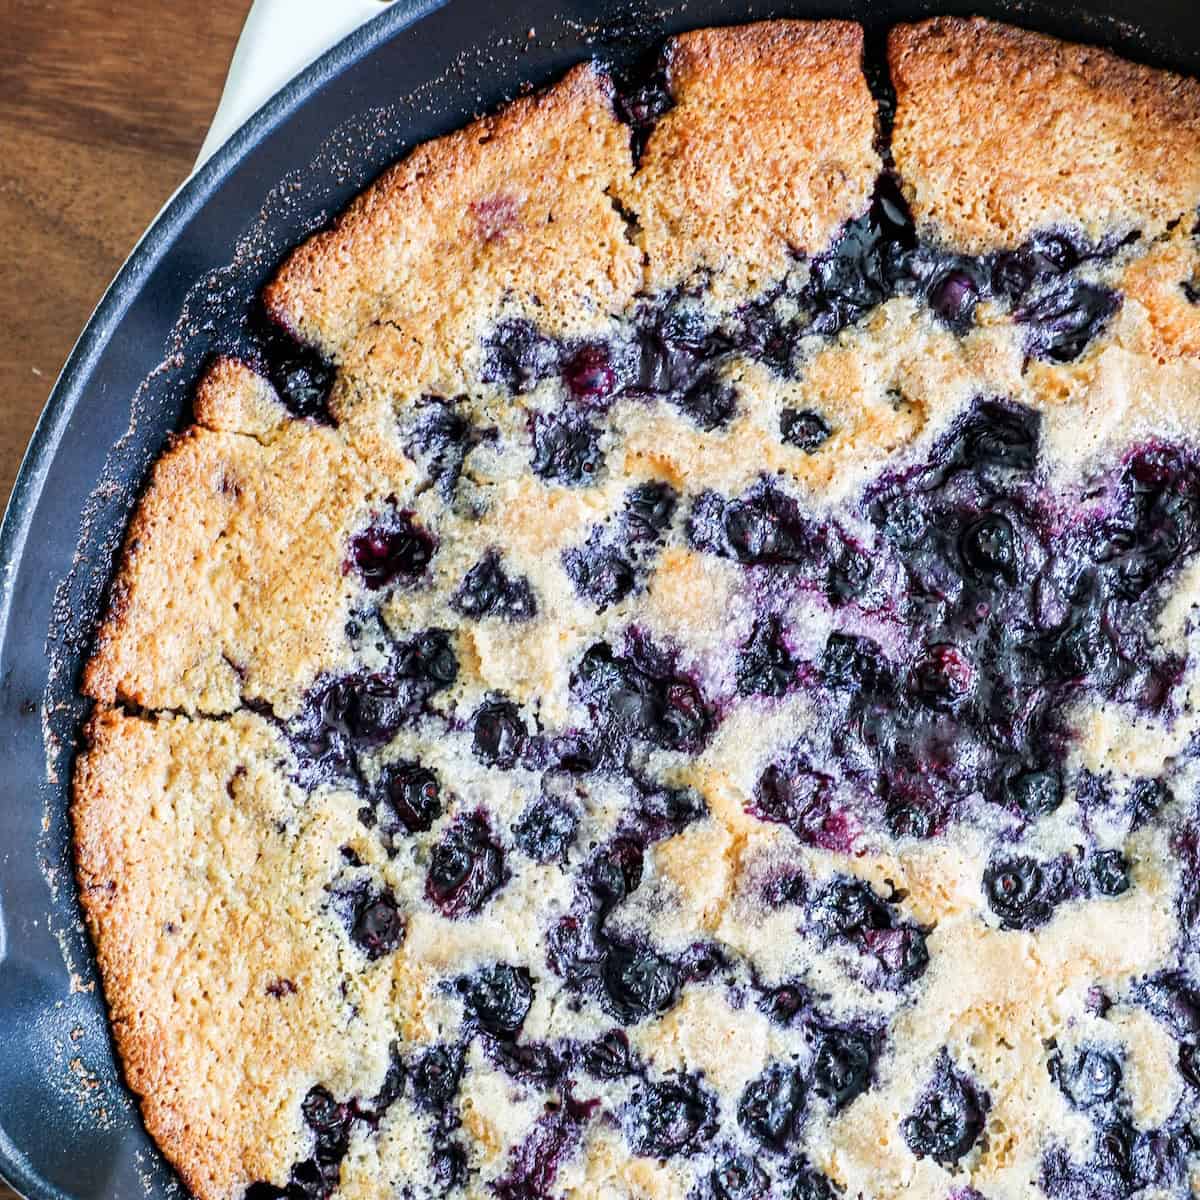 A close-up of a freshly baked blueberry skillet cake, showing a golden-brown crust and juicy blueberries embedded in the surface.